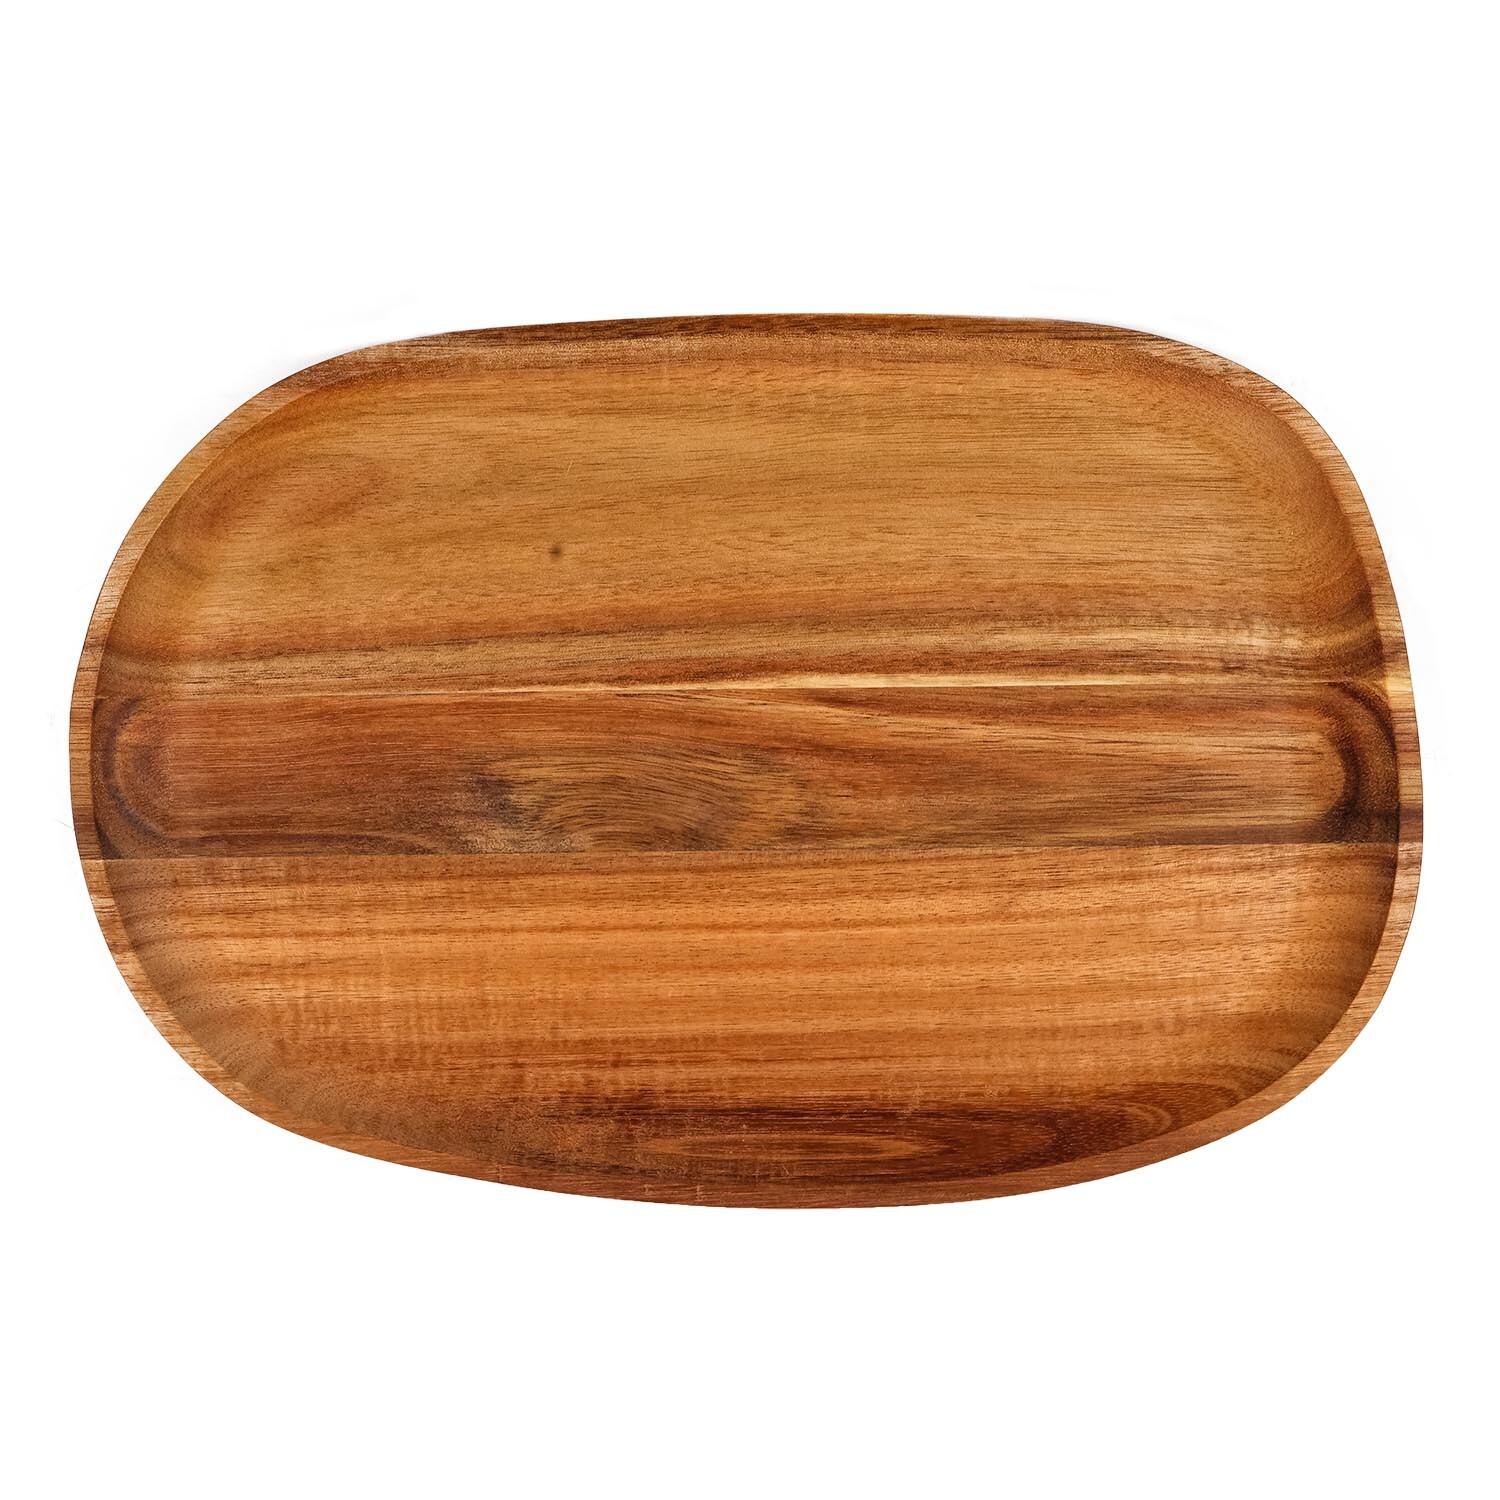 Acacia Wood Oval Serving Platter Image 1